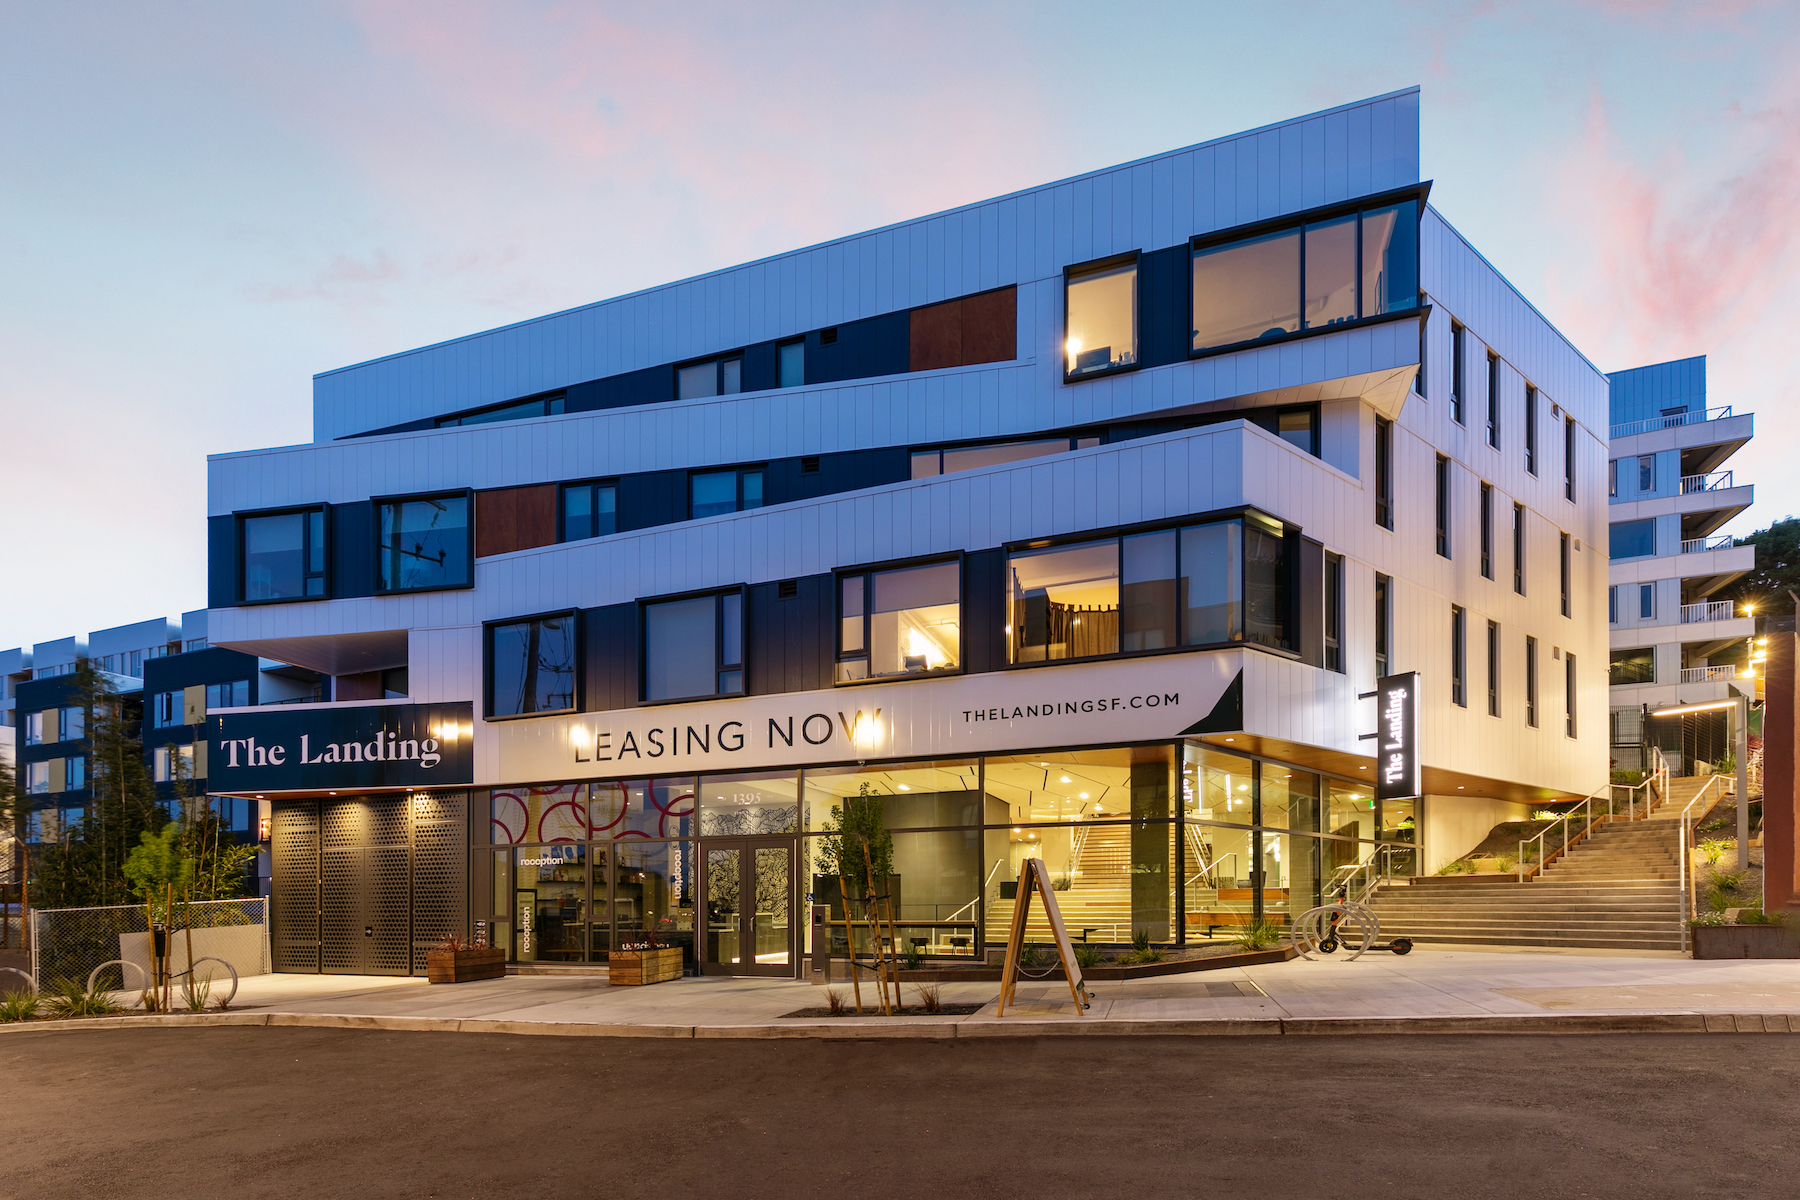 The system at The Landing, a 308,000-sf multifamily apartment building in the Dogpatch neighborhood, will recycle up to 1 million gallons of water annually. Water recycling pioneer Epic Cleantec will operate the systems. Photo: Business Wire